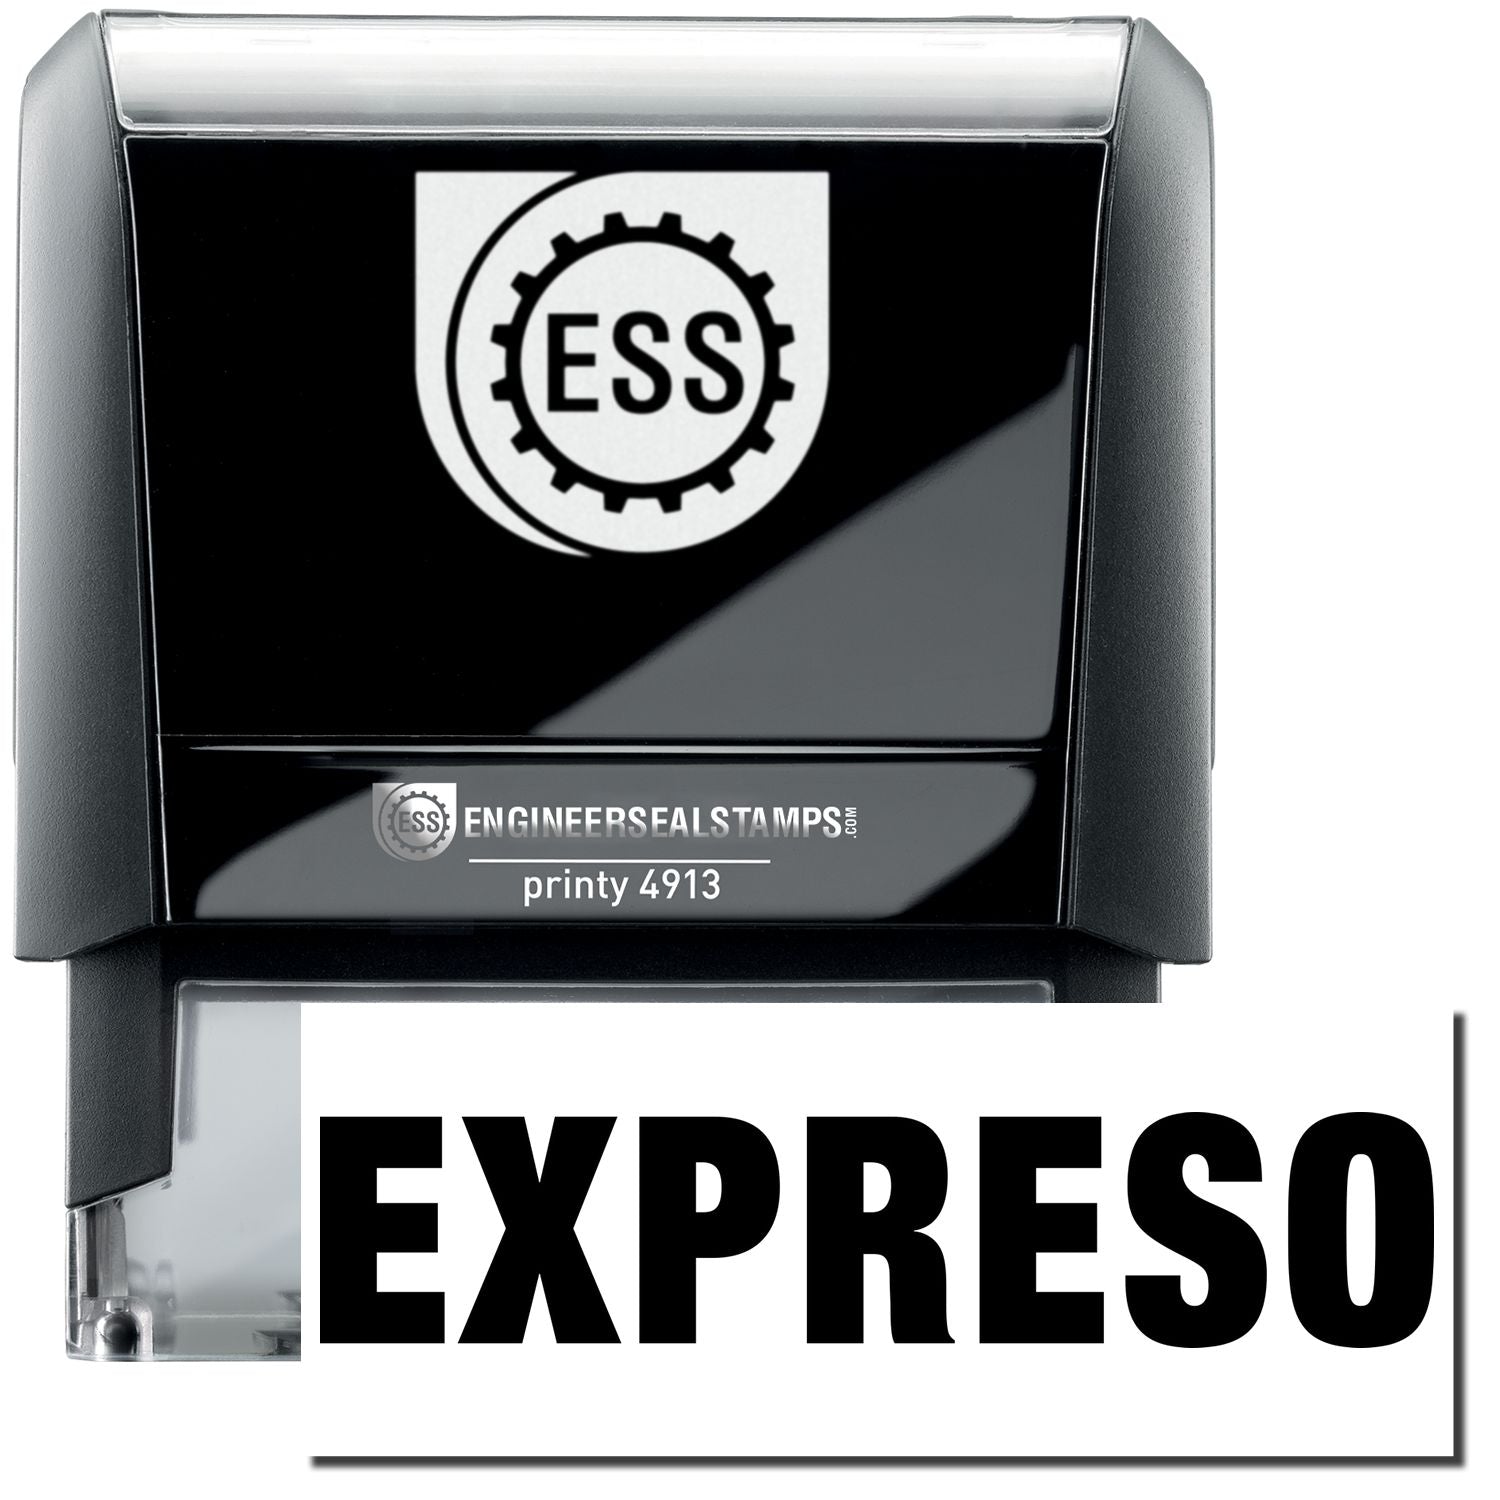 A self-inking stamp with a stamped image showing how the text "EXPRESO" in a large font is displayed by it after stamping.